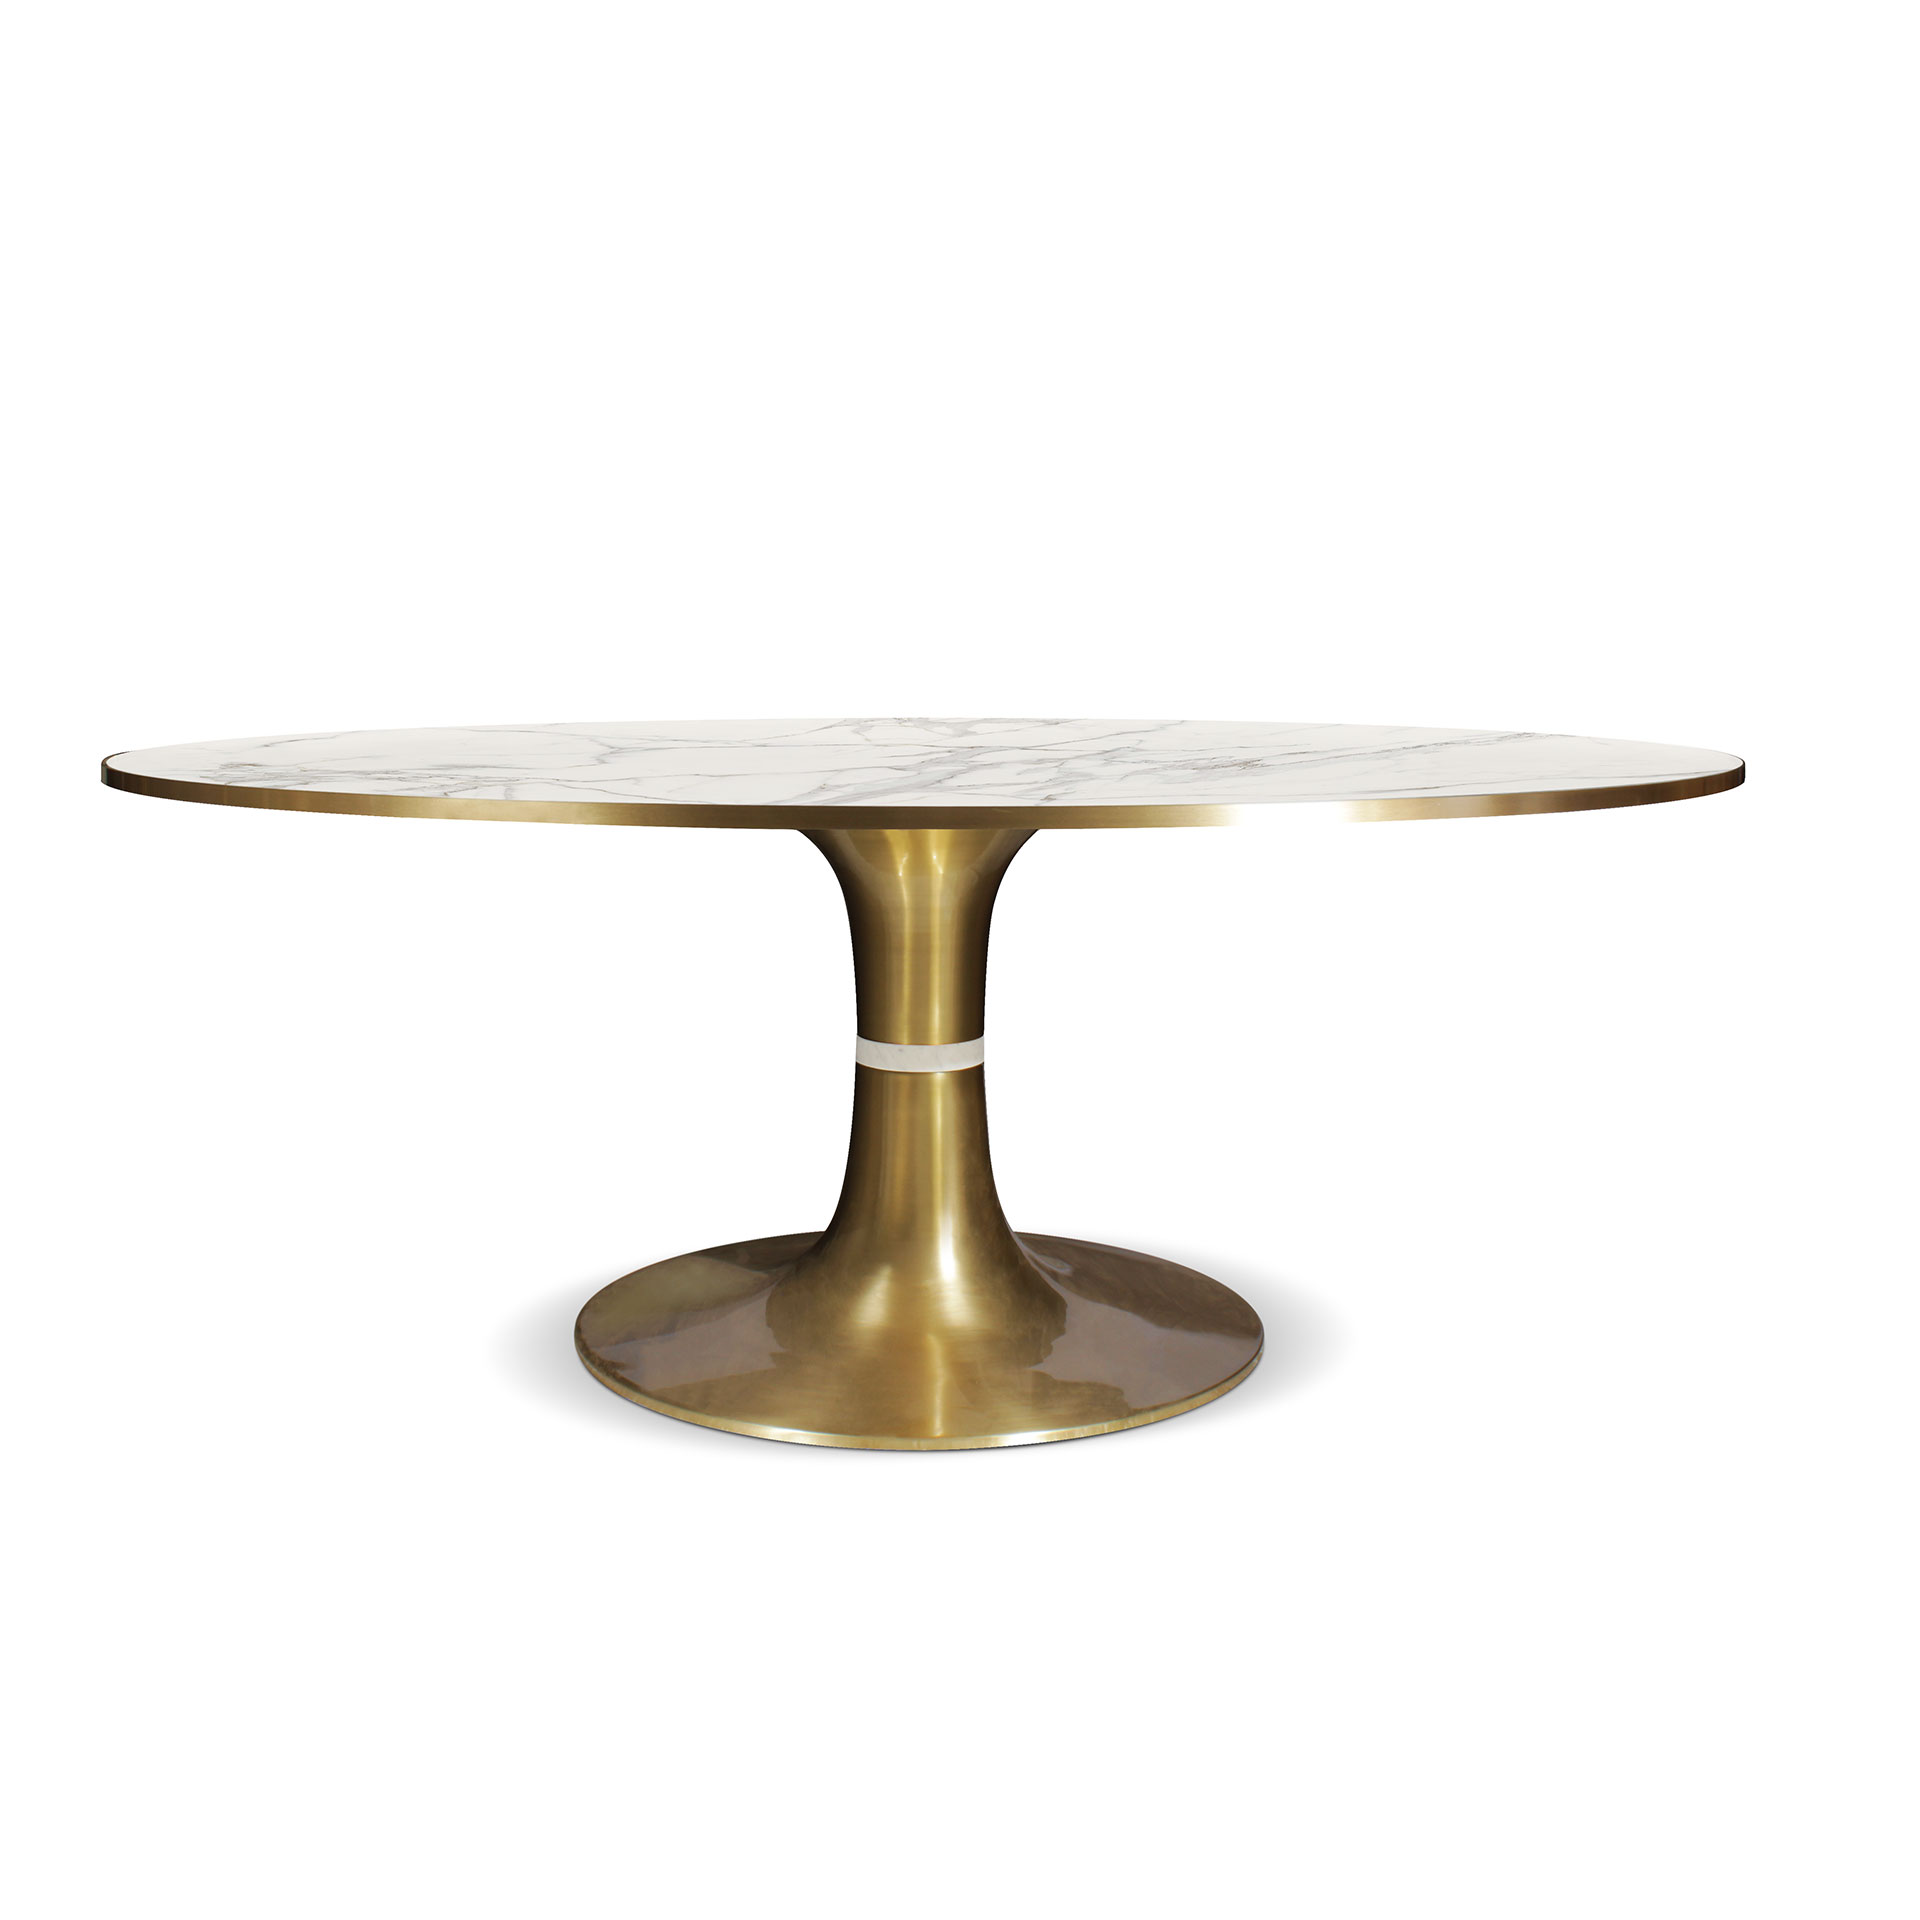 Caddo dining table